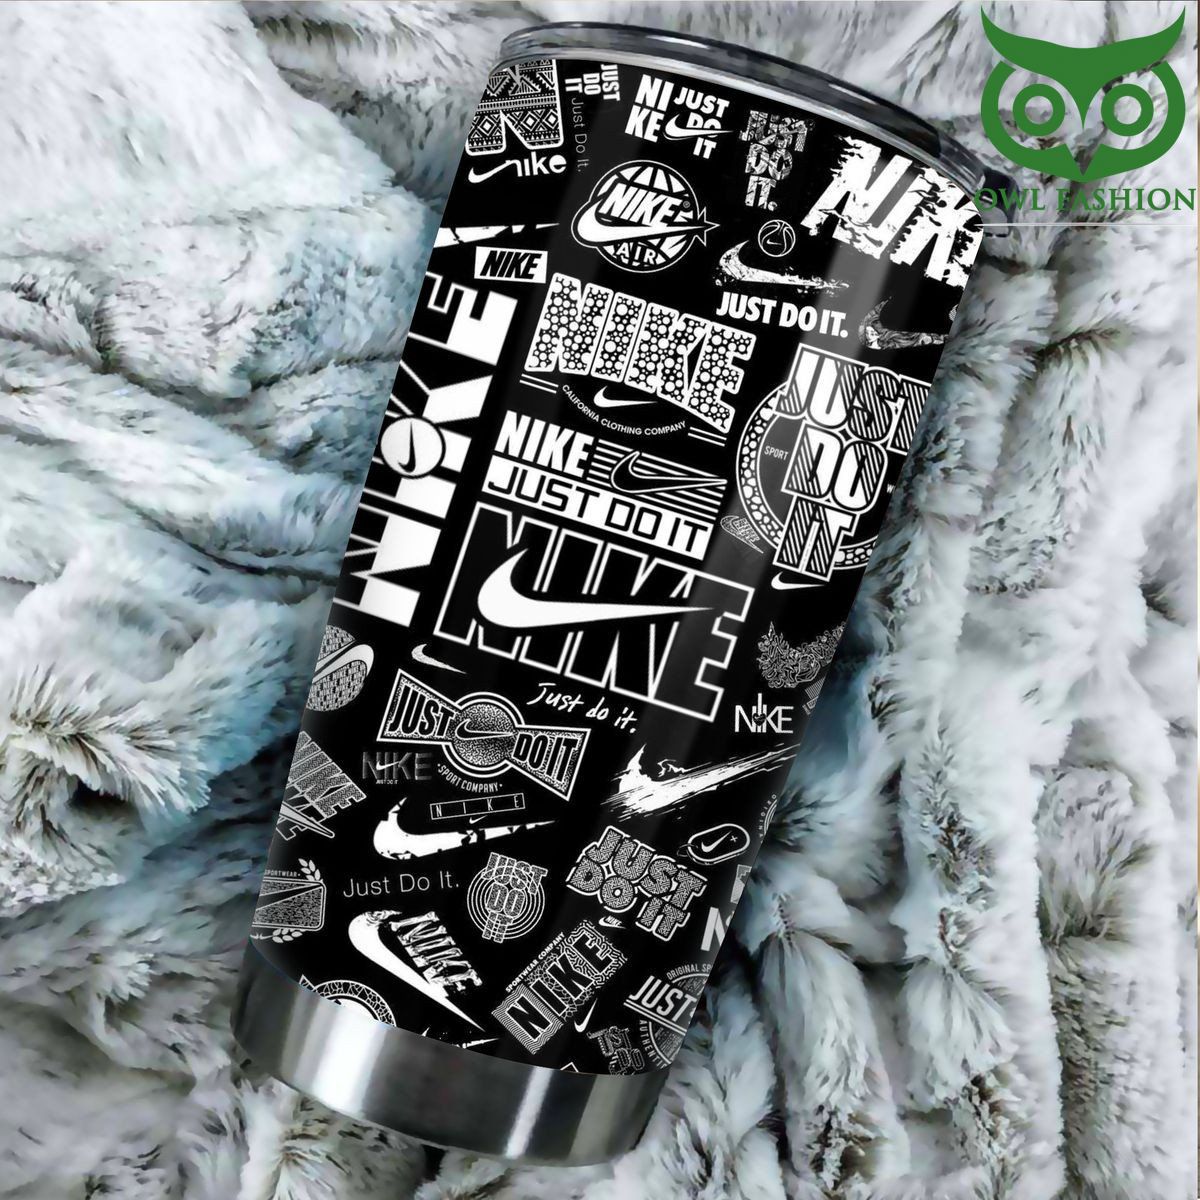 79 Nike Just do it basketball pattern tumbler cup